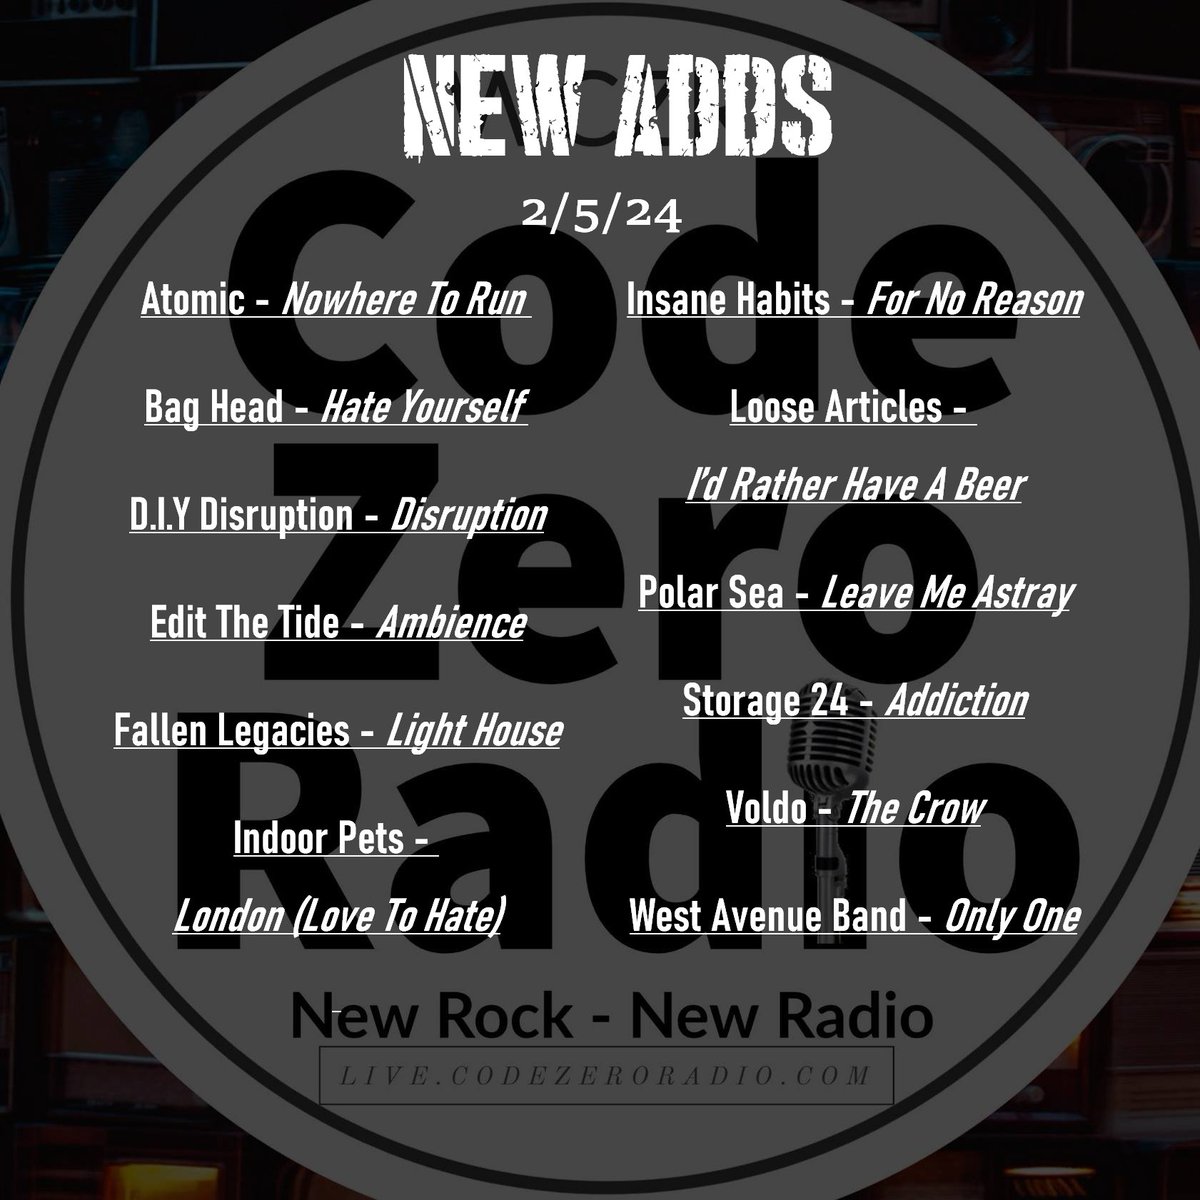 Your week just got better! Check out shiny new music. Now in rotation plus featured on Fresh Rocks, weekdays at ! pm CST/ 7pm GMT. (links in bio friendo) #andriod #newrock #radio #apps #alternativerock #Nobex #rotation #appstore #streaming #iPhone